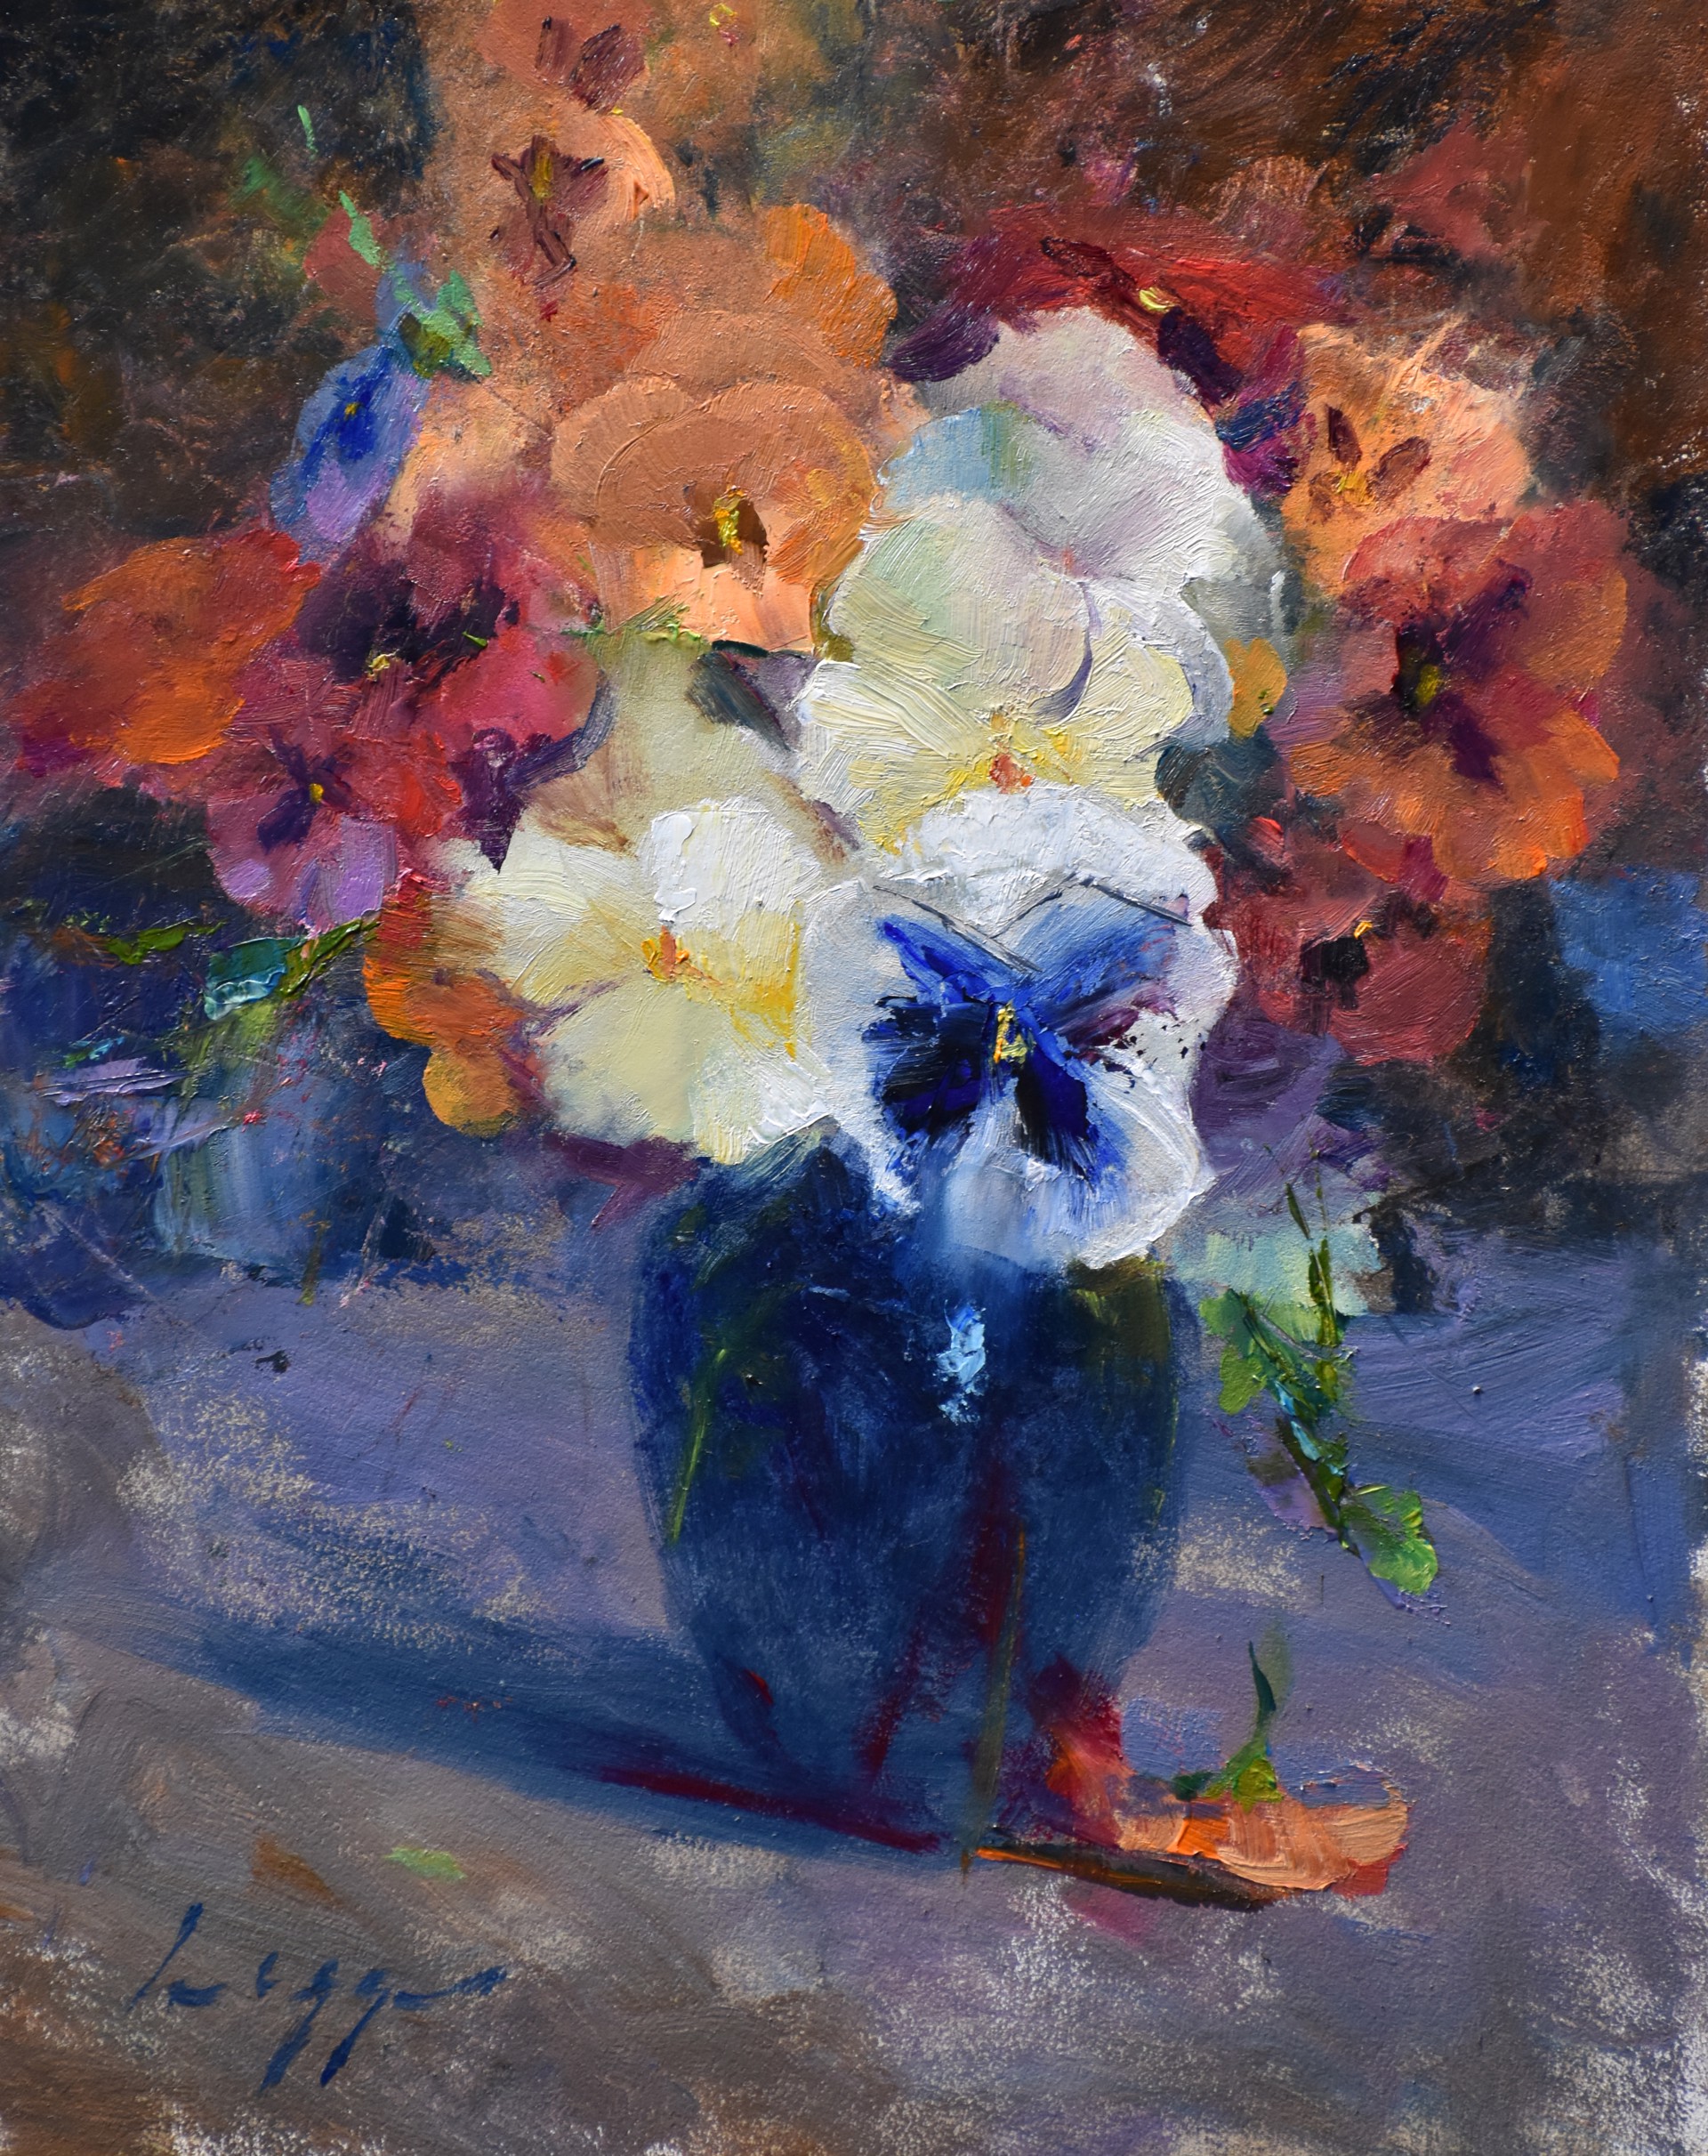 Pansies Forever by Jeff Legg